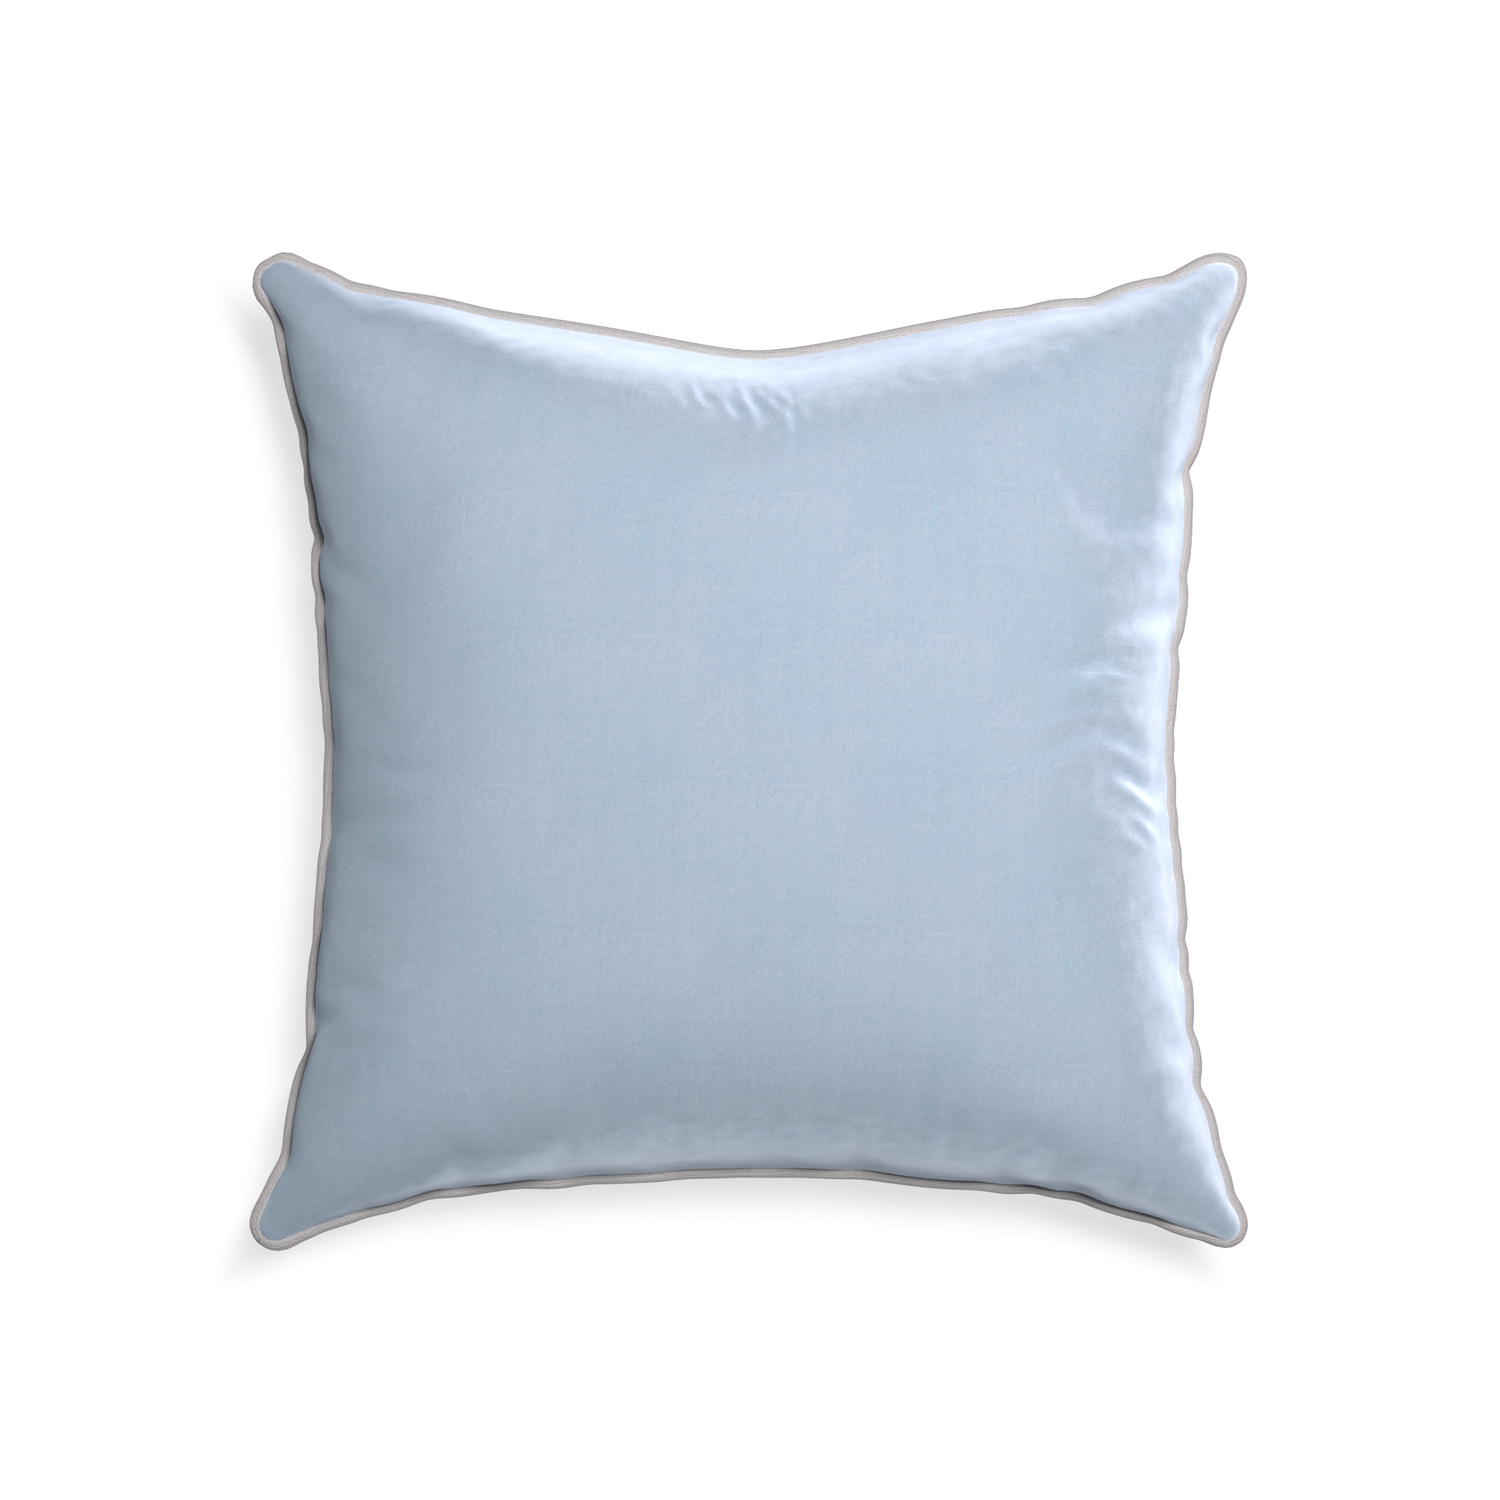 square light blue velvet pillow with grey piping